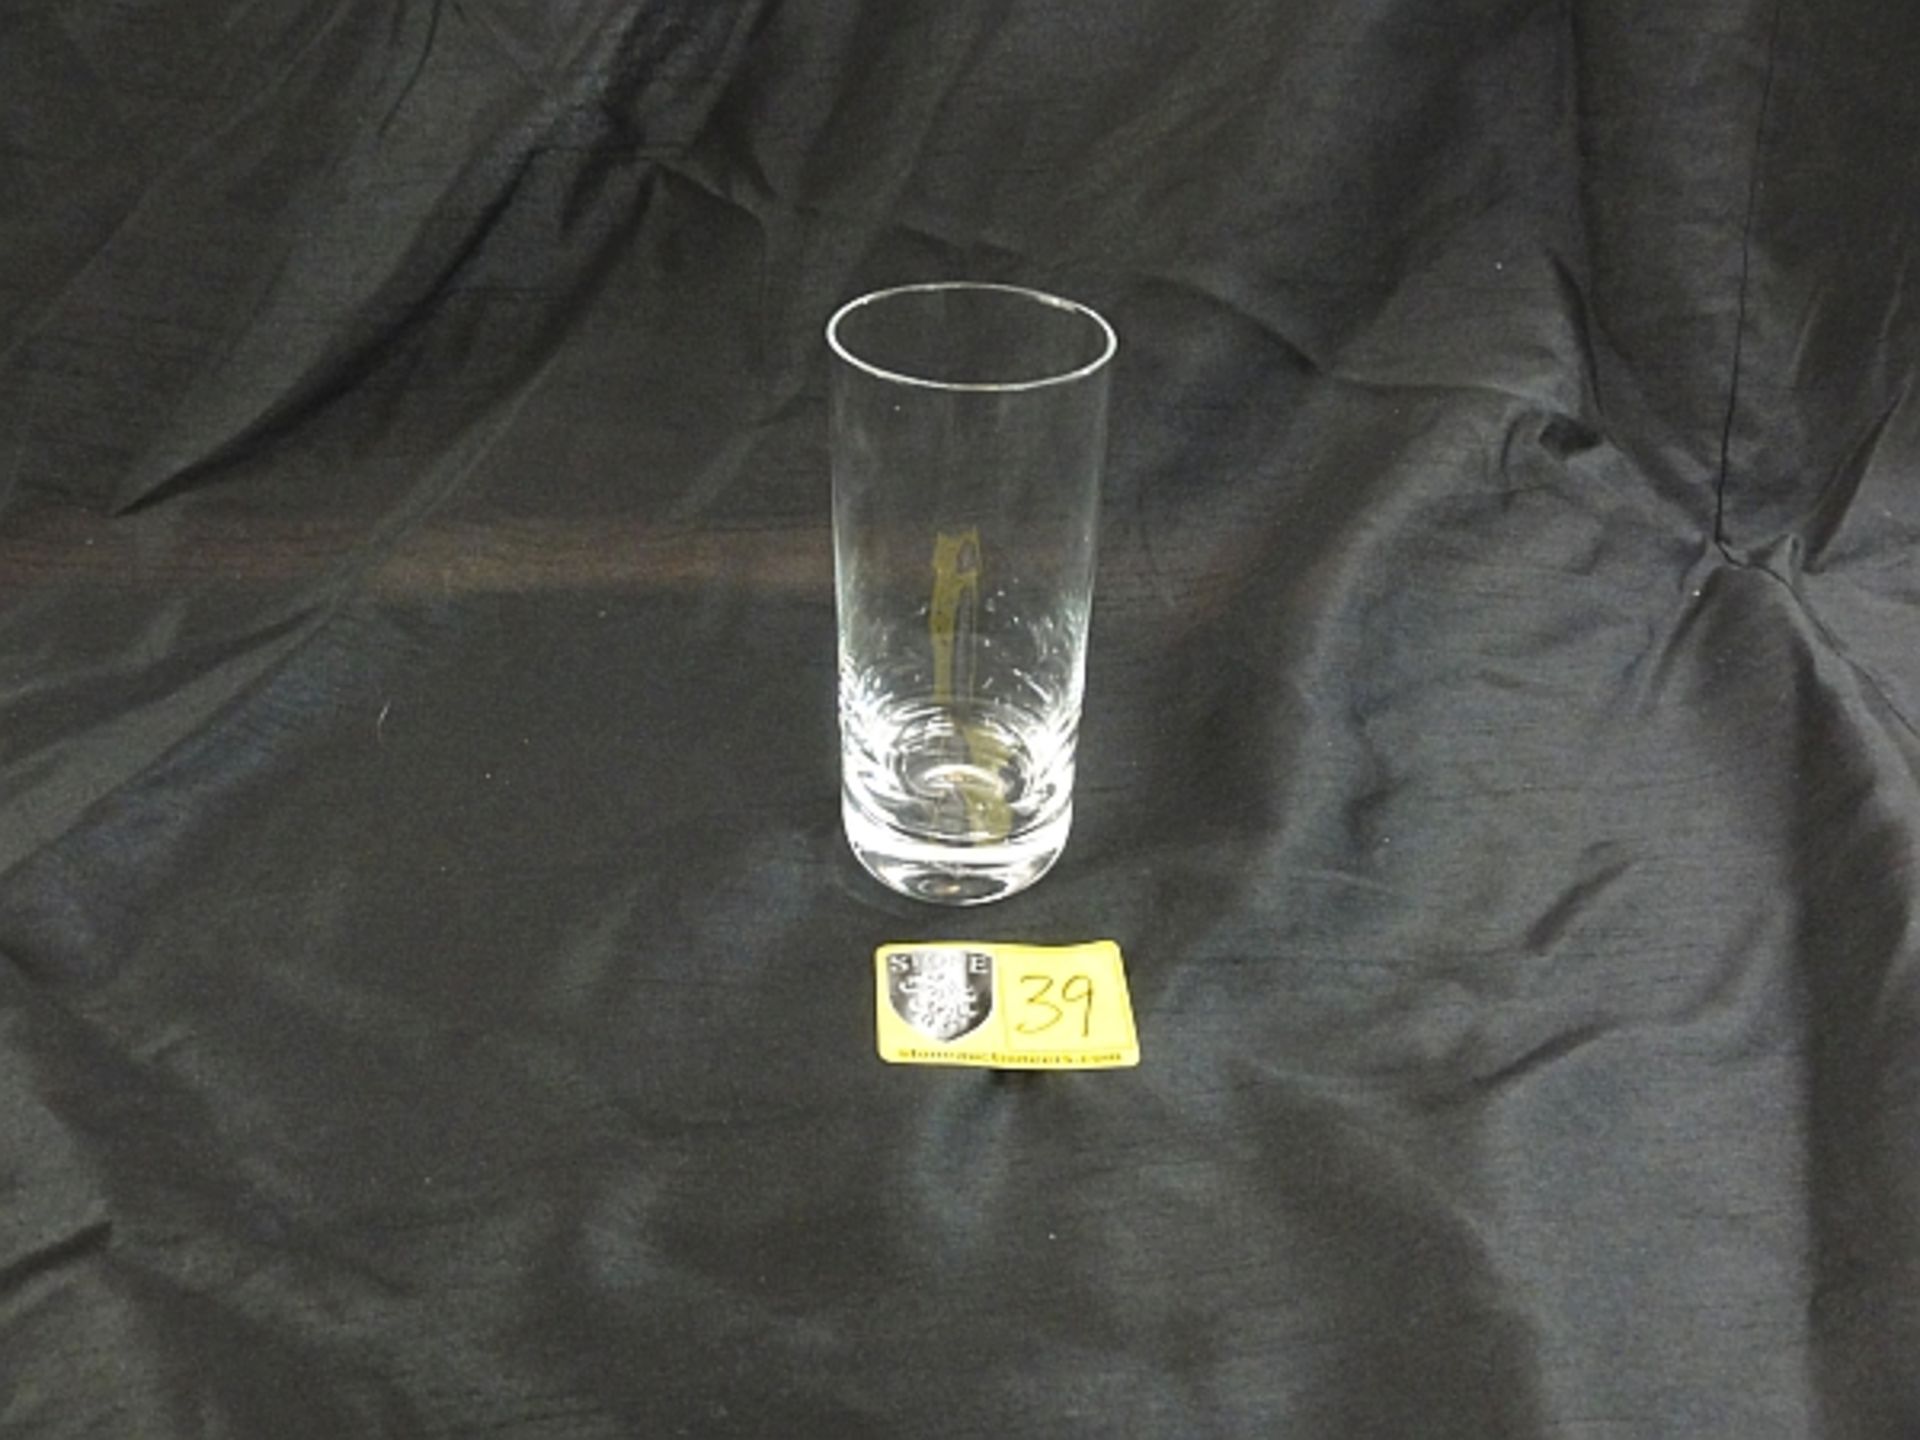 LOT OF 252 12.5 OZ. CONVENTION BEVERAGE GLASS- LOT COMES IN 7 CRATES BILLED @ $15 EA